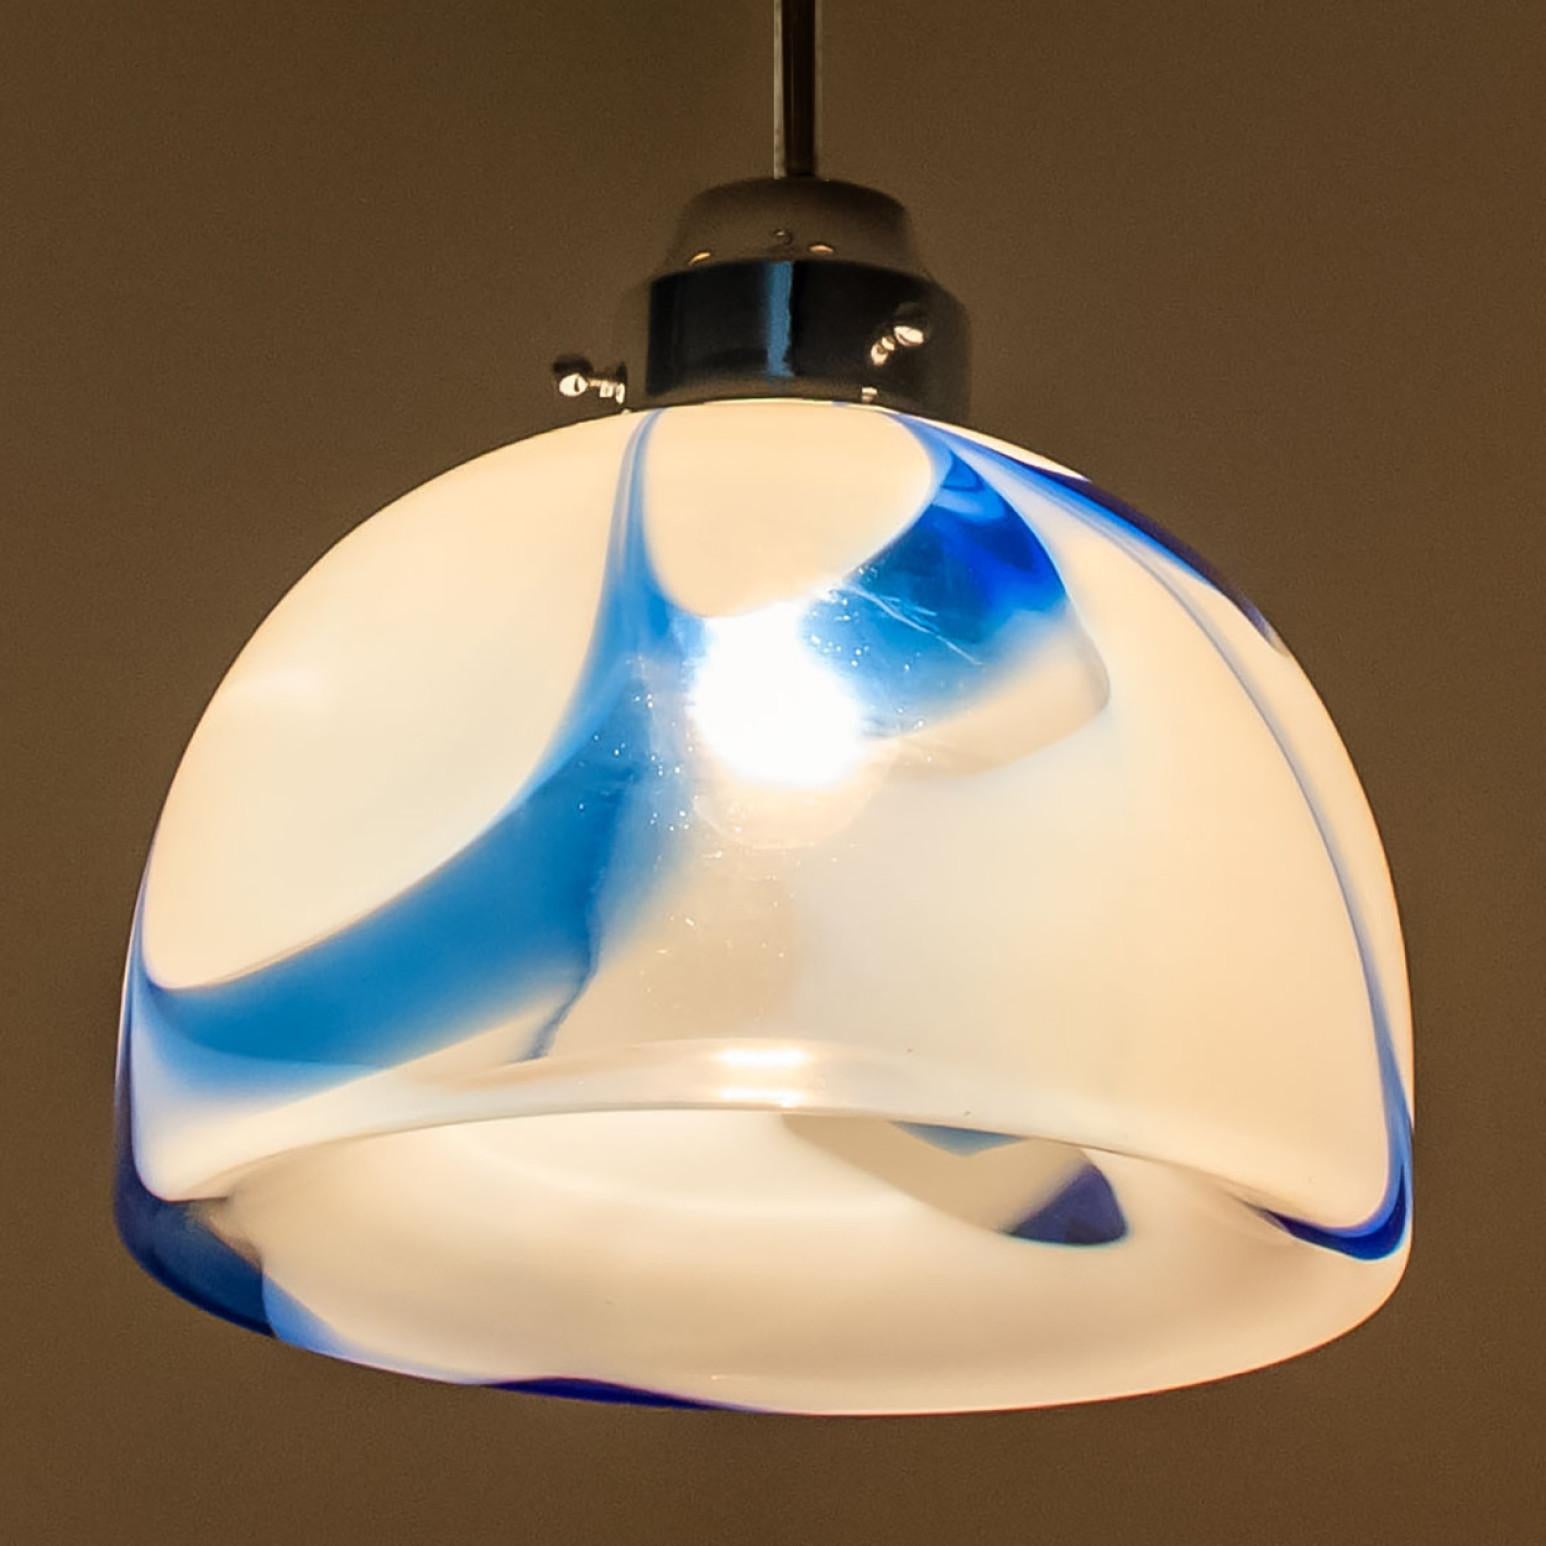 Murano White and Blue Glass Pendant Light, Italy, 1970s For Sale 2